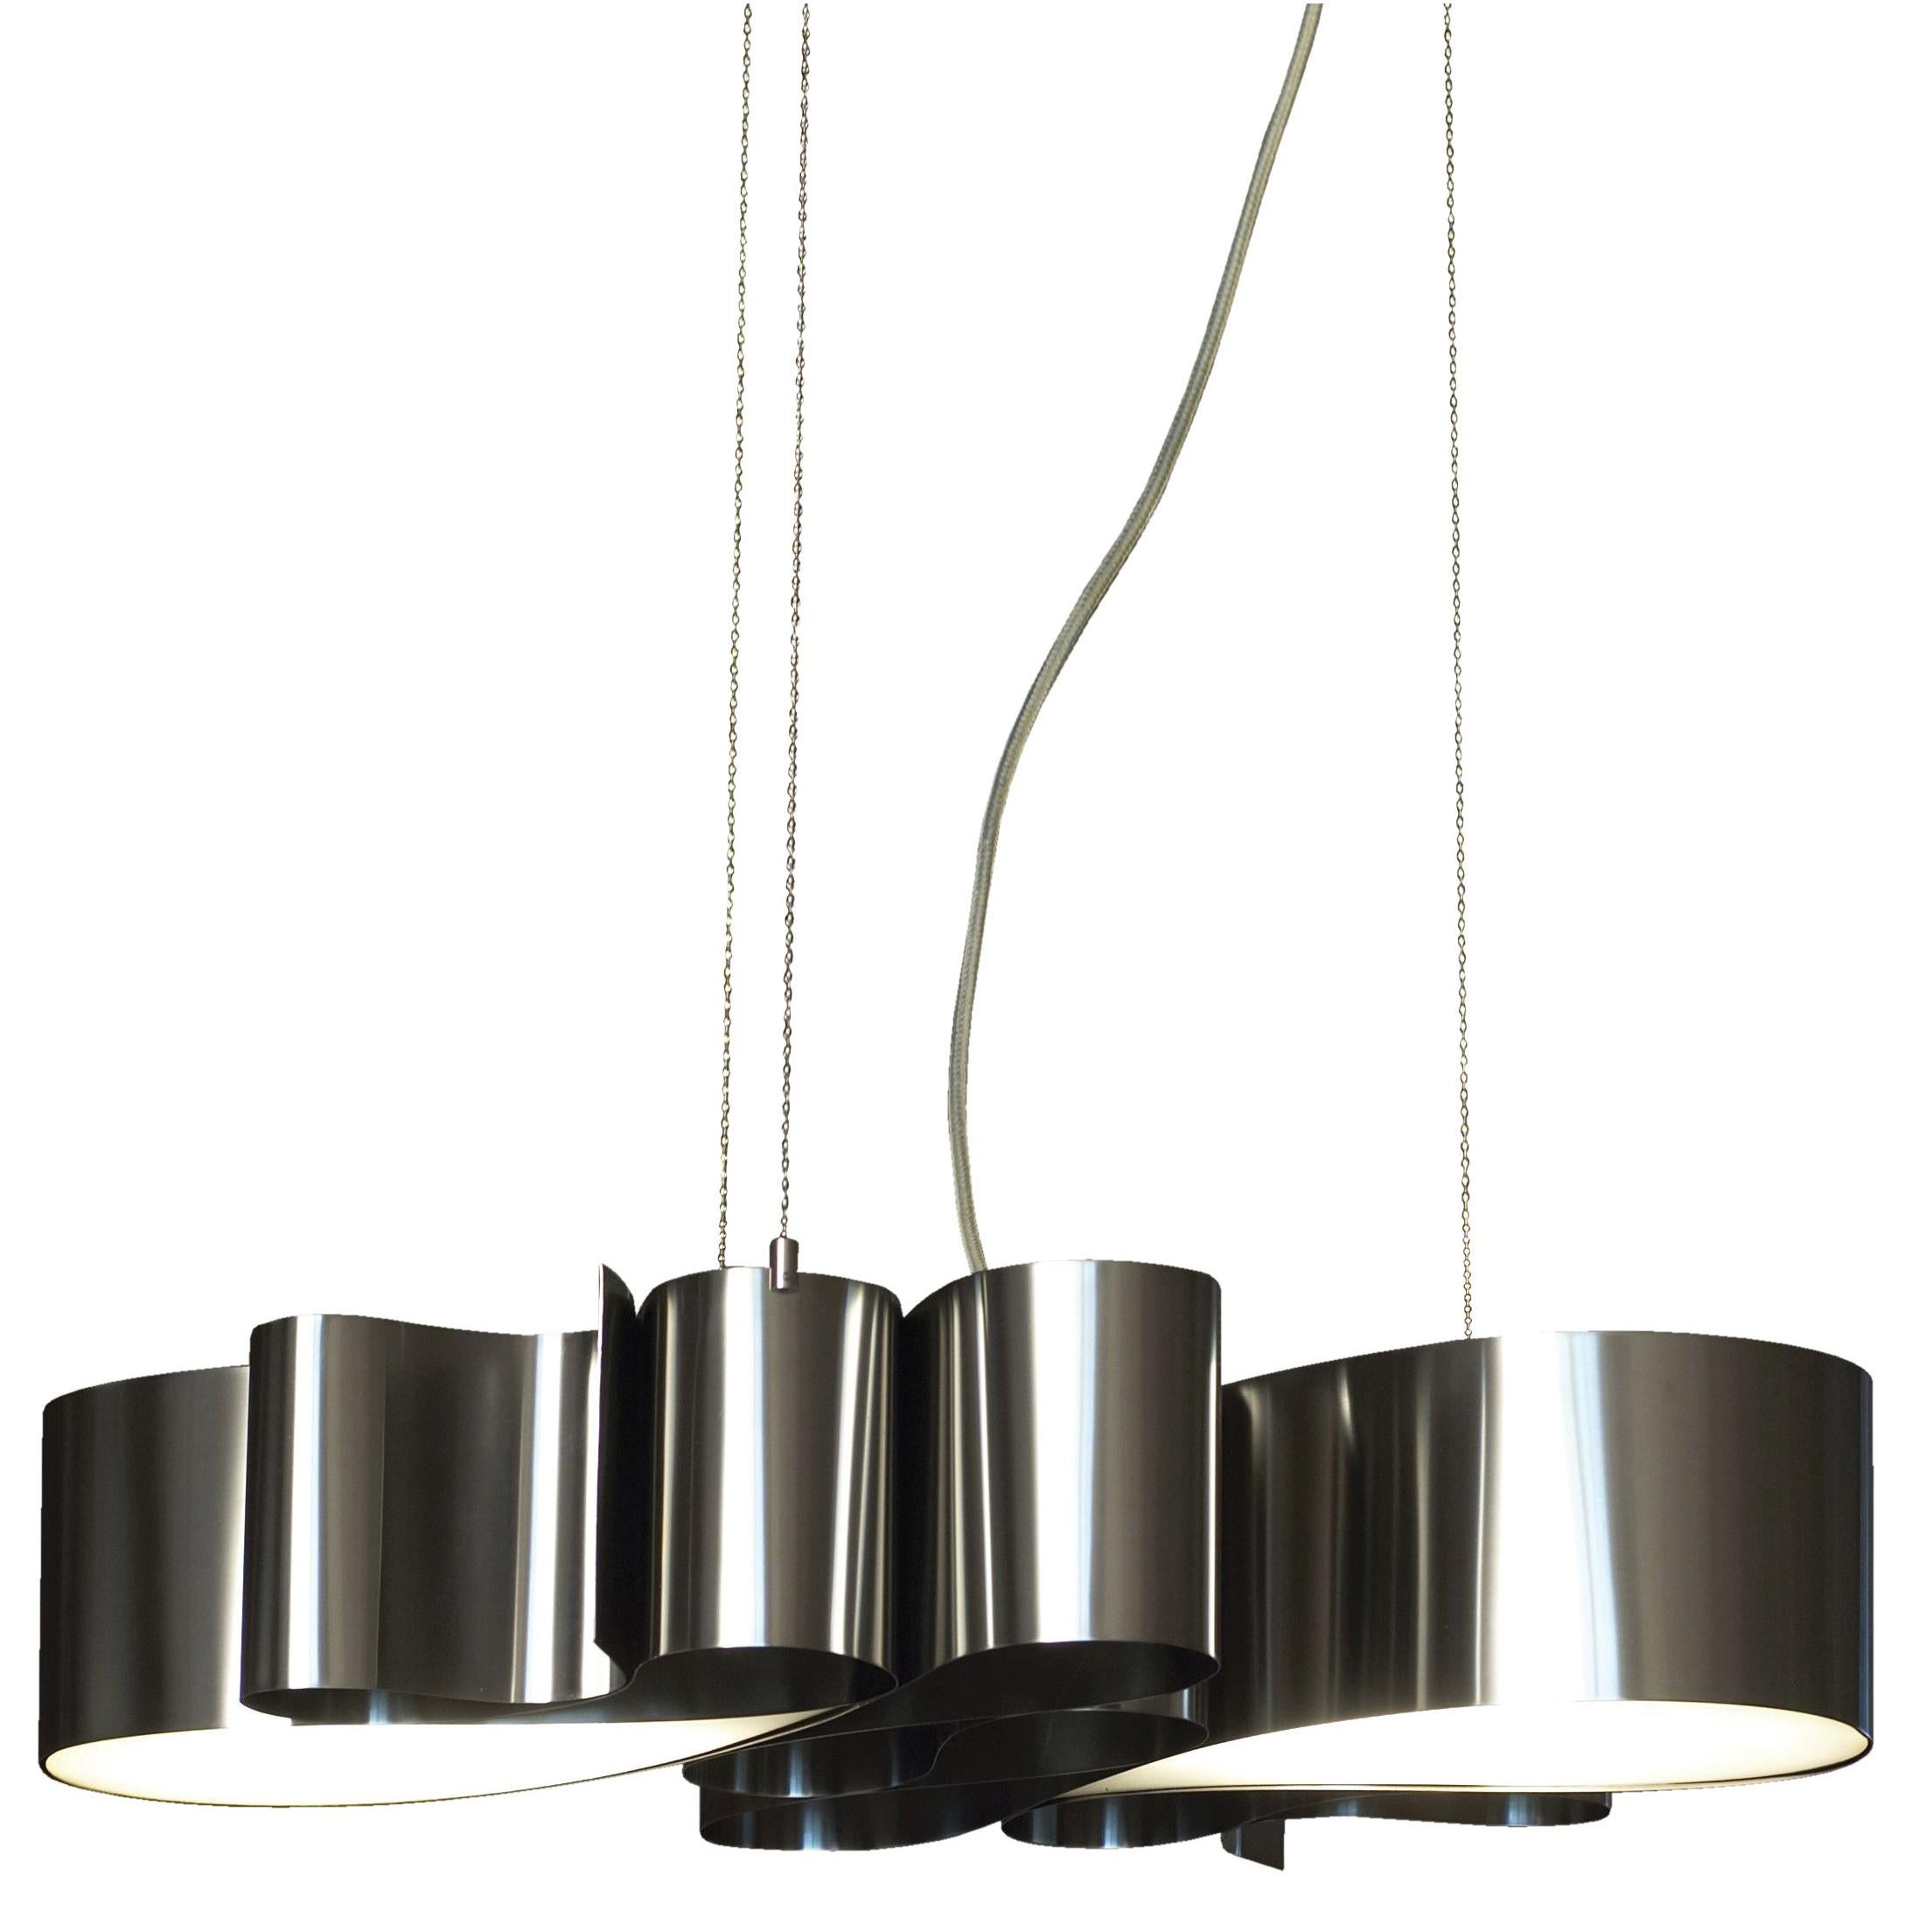 Jacco Maris Paraaf Pendant in Stainless Steel For Sale